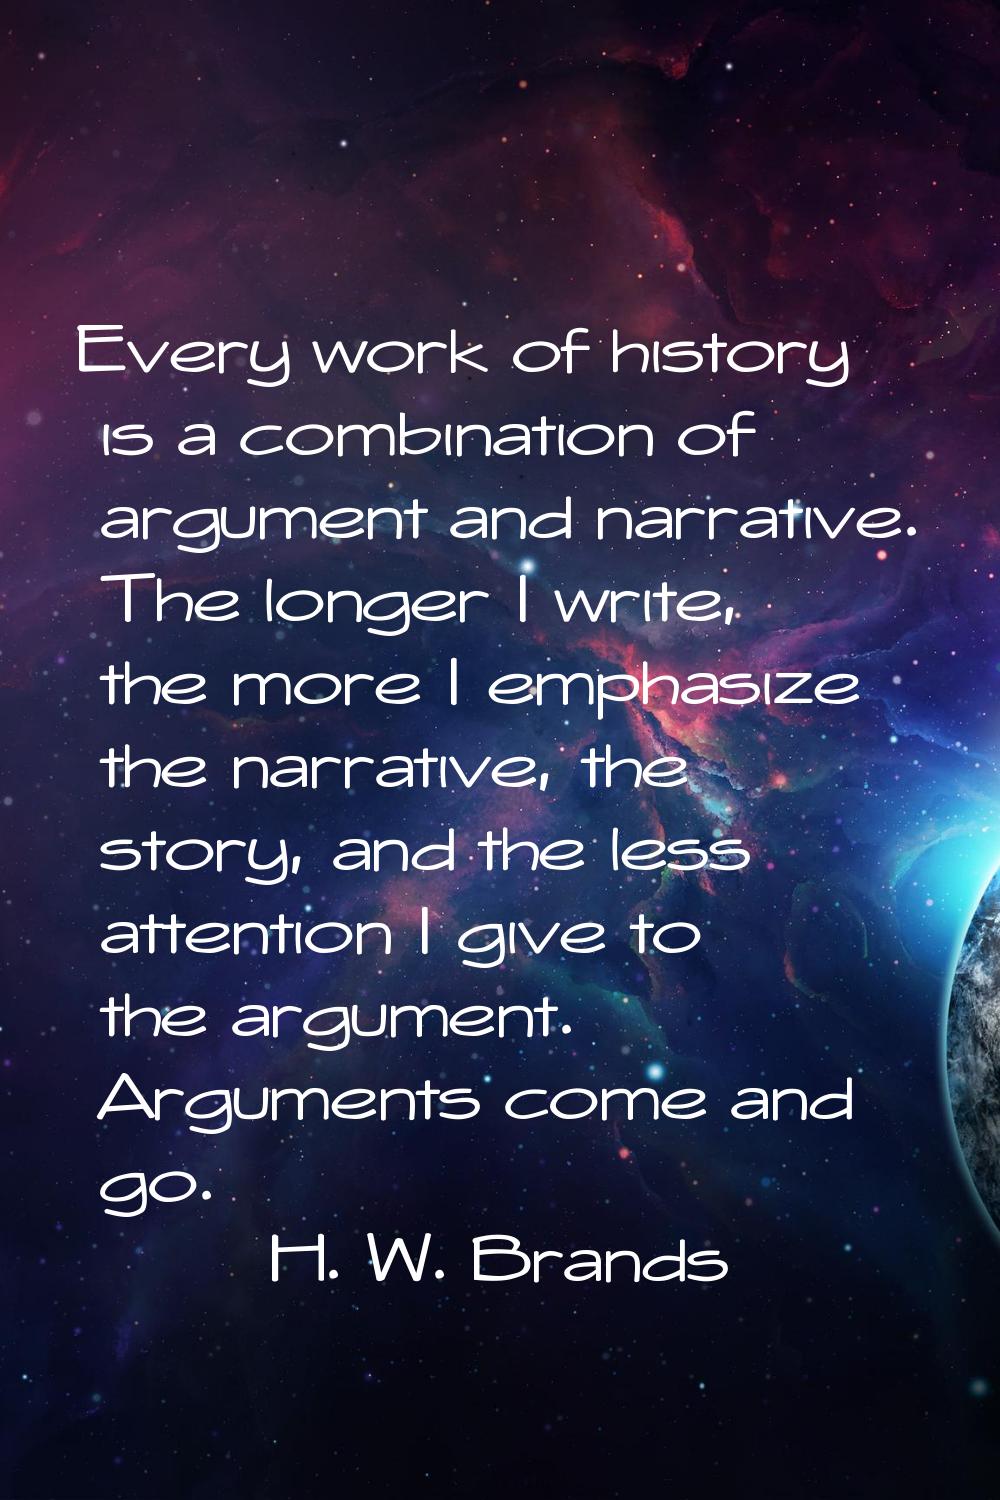 Every work of history is a combination of argument and narrative. The longer I write, the more I em